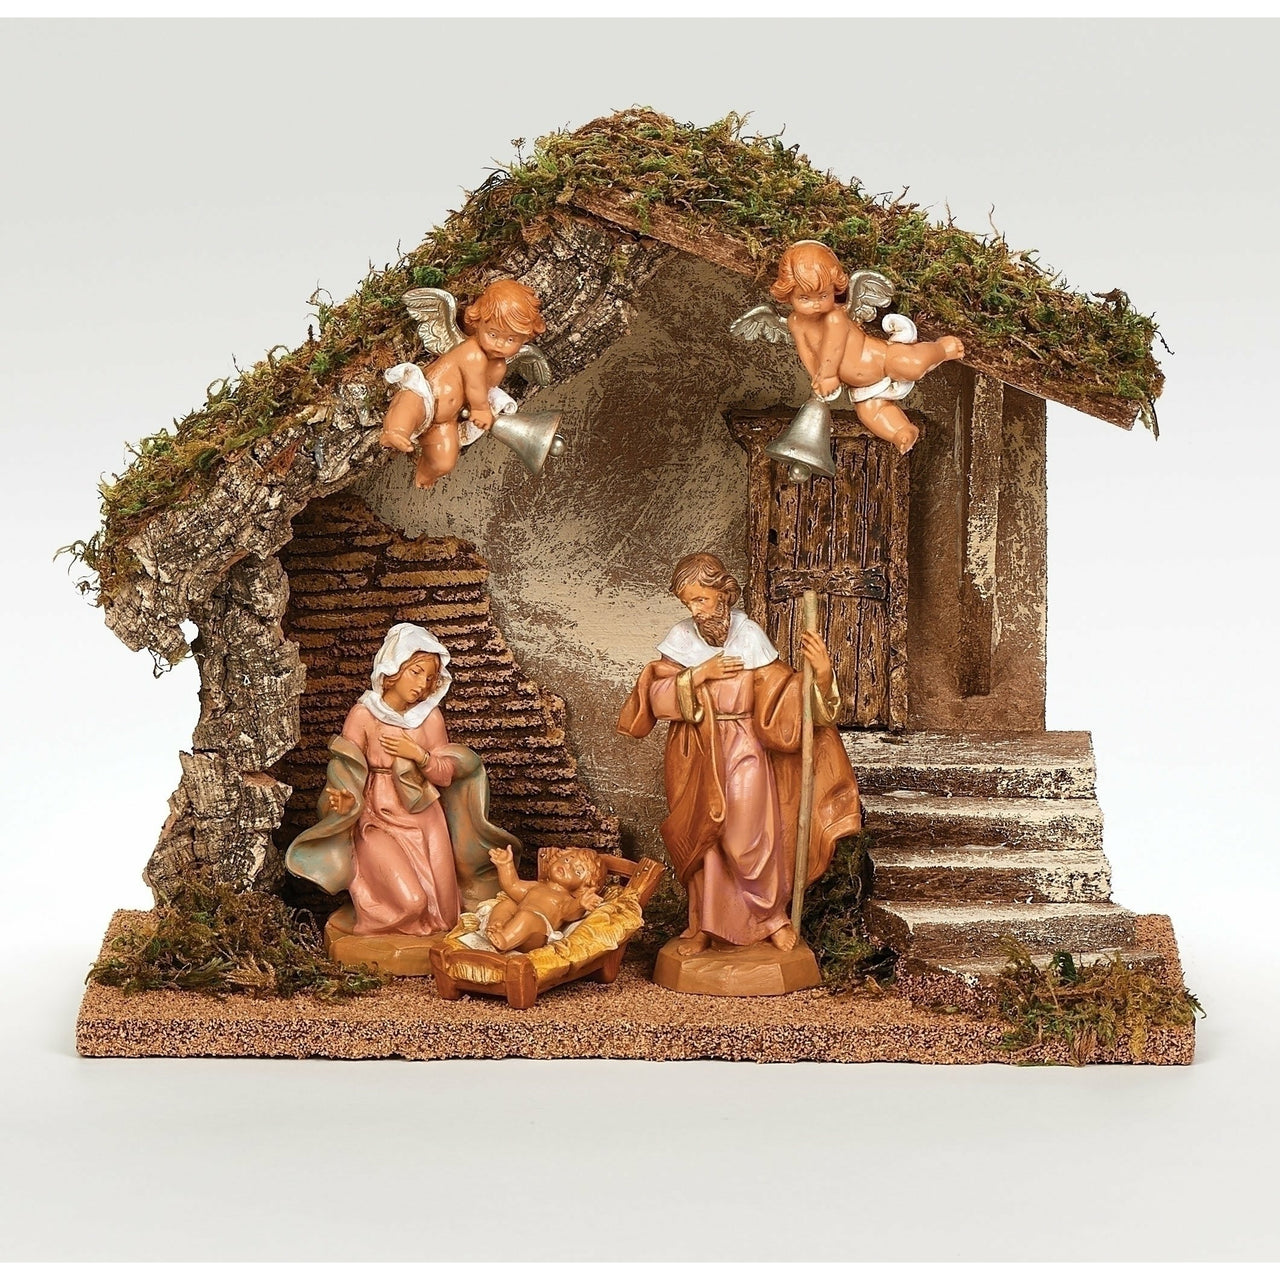 5 Piece Piece Wedding Nativity Set for 5 Inch Scale - Lighted with Adaptor Set (Sold Alone)